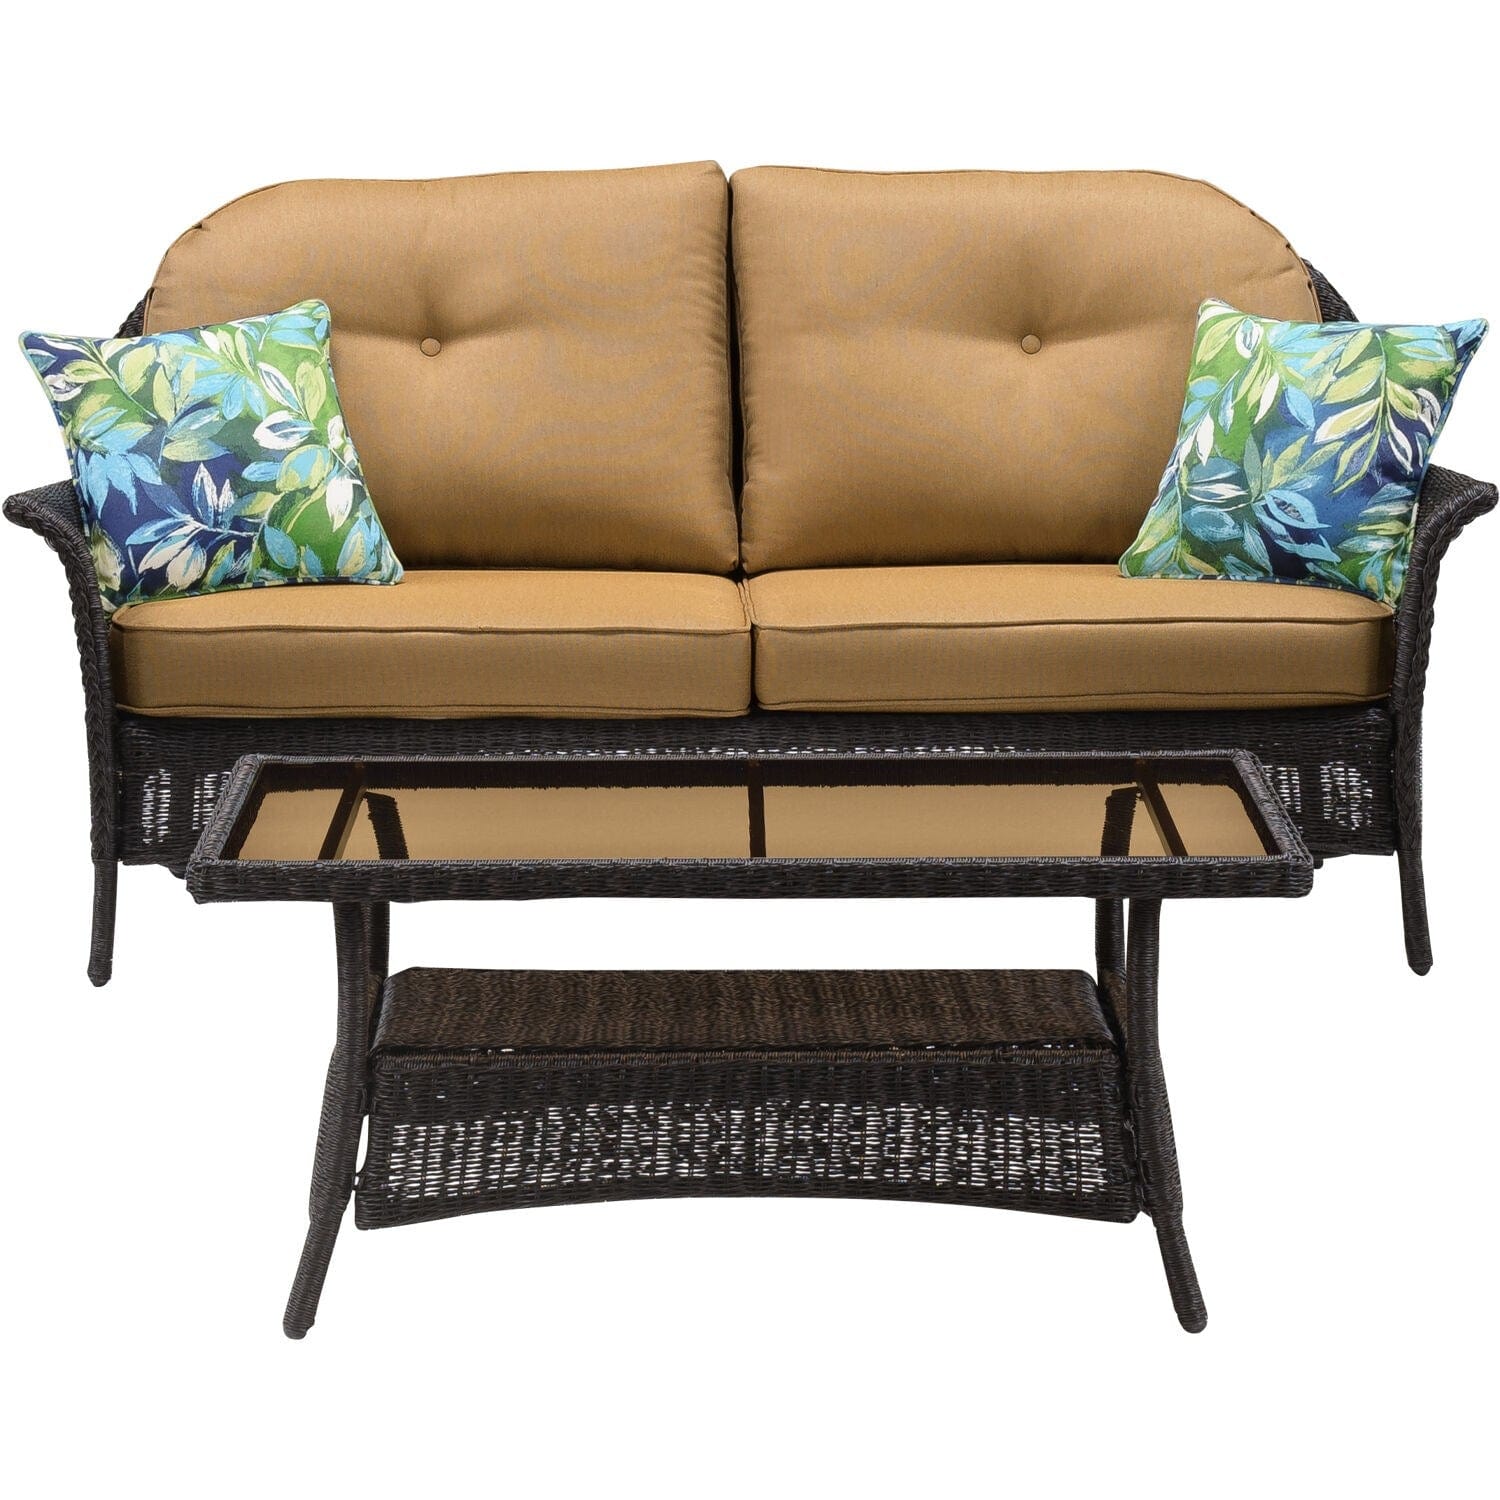 Hanover Conversation Set Hanover - Sun Porch 4pc Set: 1 Loveseat, 2 Side Chairs and Coffee Table